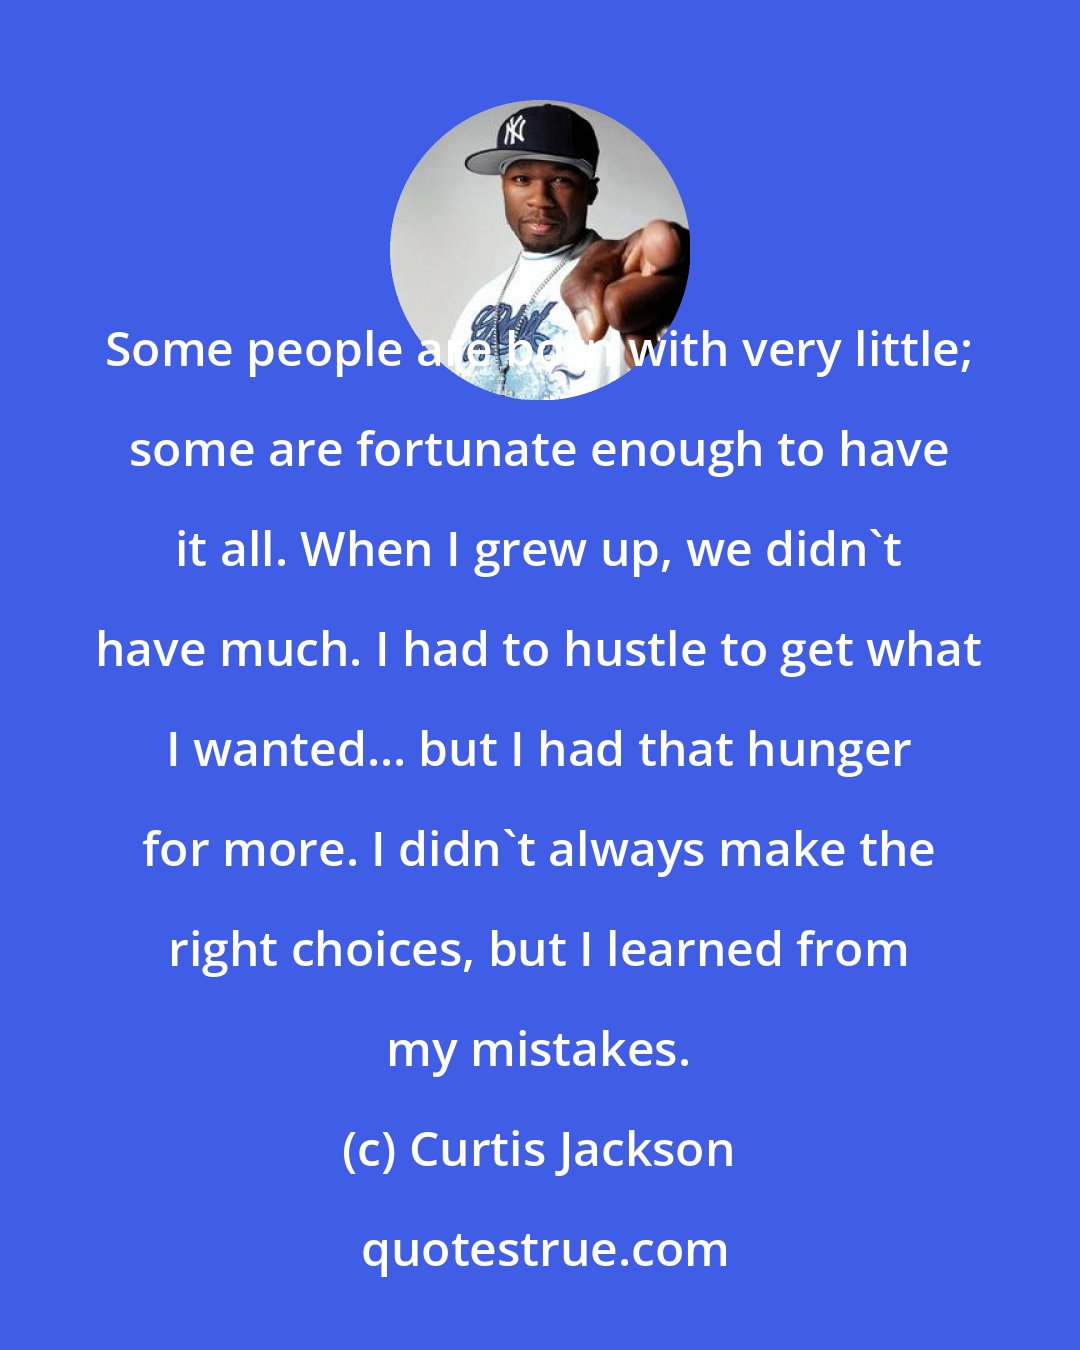 Curtis Jackson: Some people are born with very little; some are fortunate enough to have it all. When I grew up, we didn't have much. I had to hustle to get what I wanted... but I had that hunger for more. I didn't always make the right choices, but I learned from my mistakes.